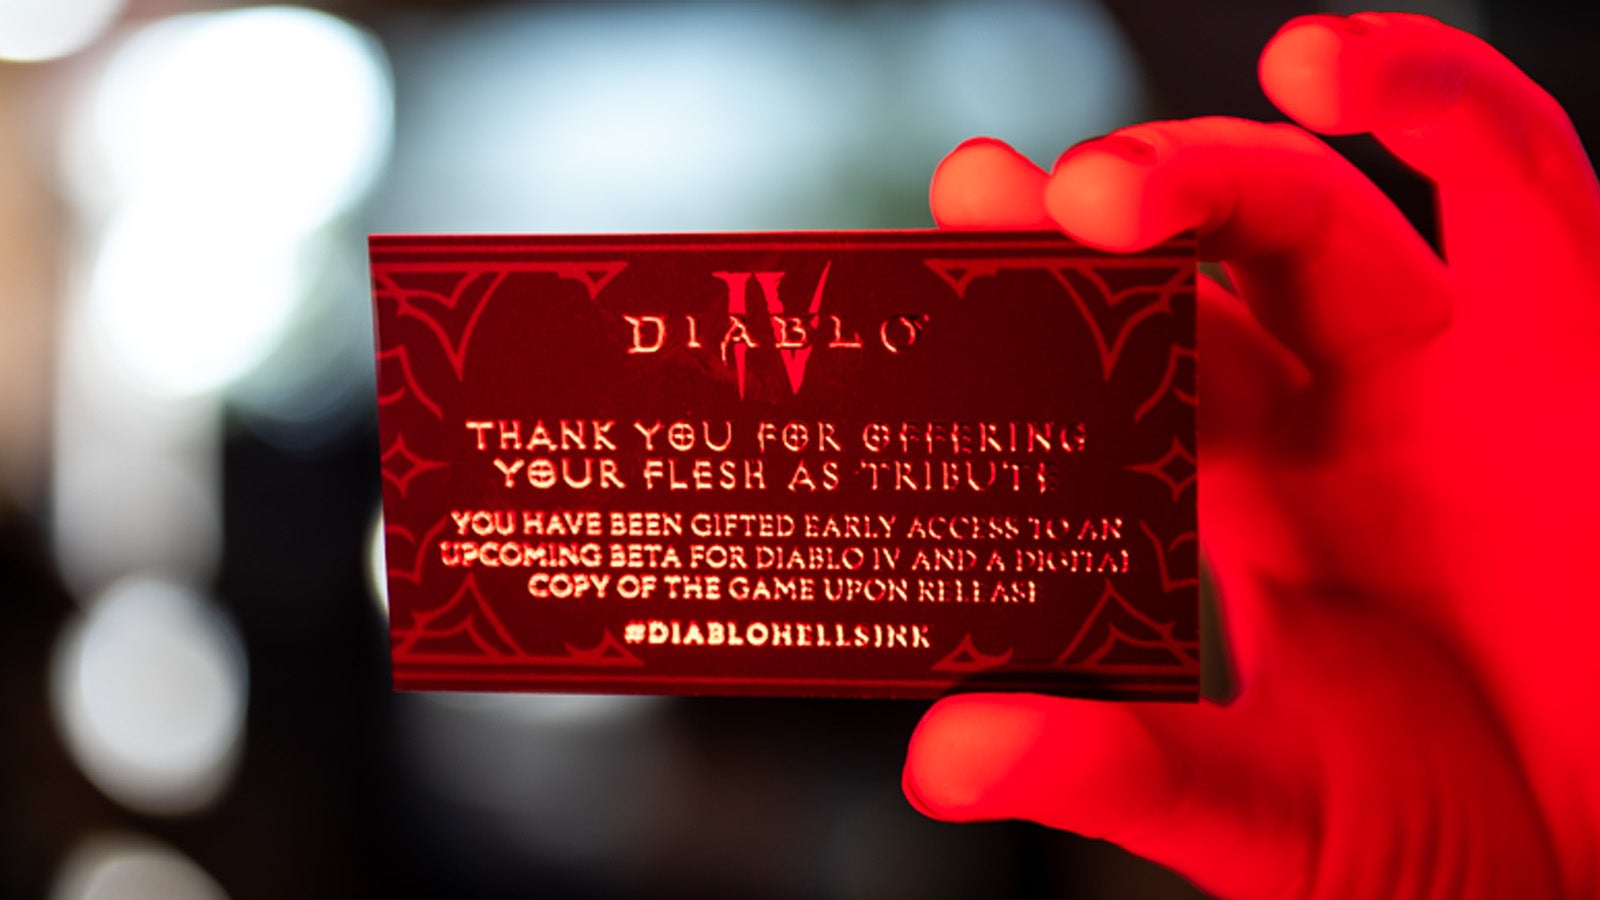 Blizzard's beta access card for Diablo 4 tattoo owners.